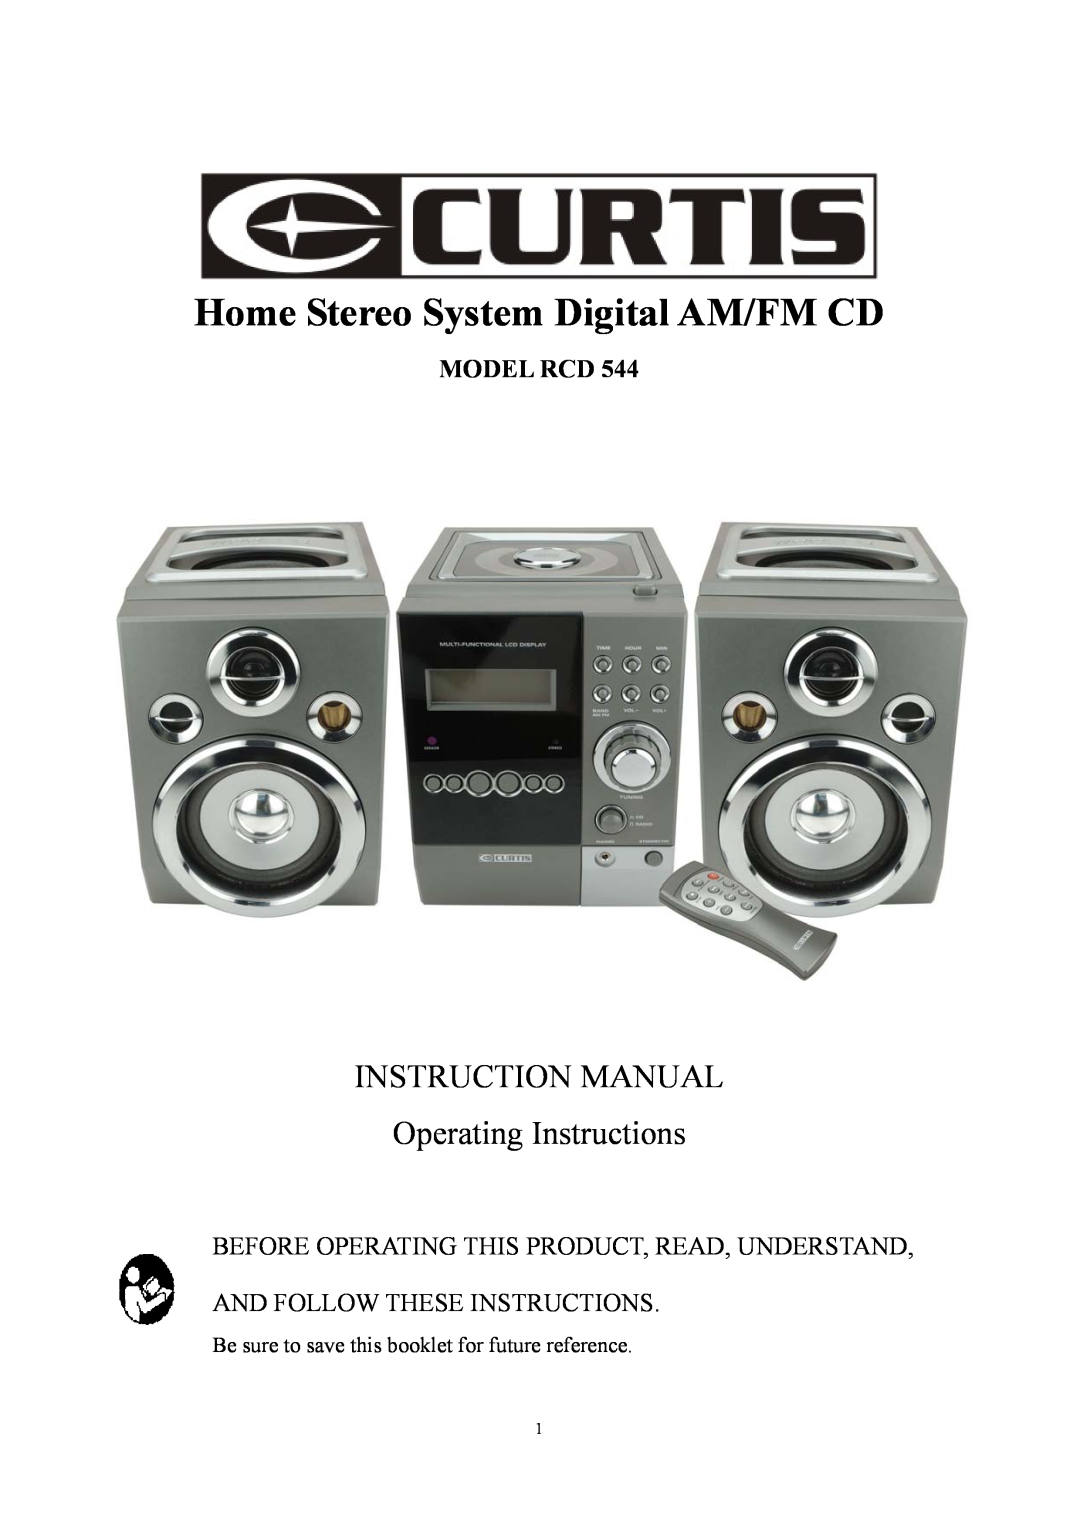 Curtis RCD544 instruction manual Home Stereo System Digital AM/FM CD, Model Rcd, And Follow These Instructions 